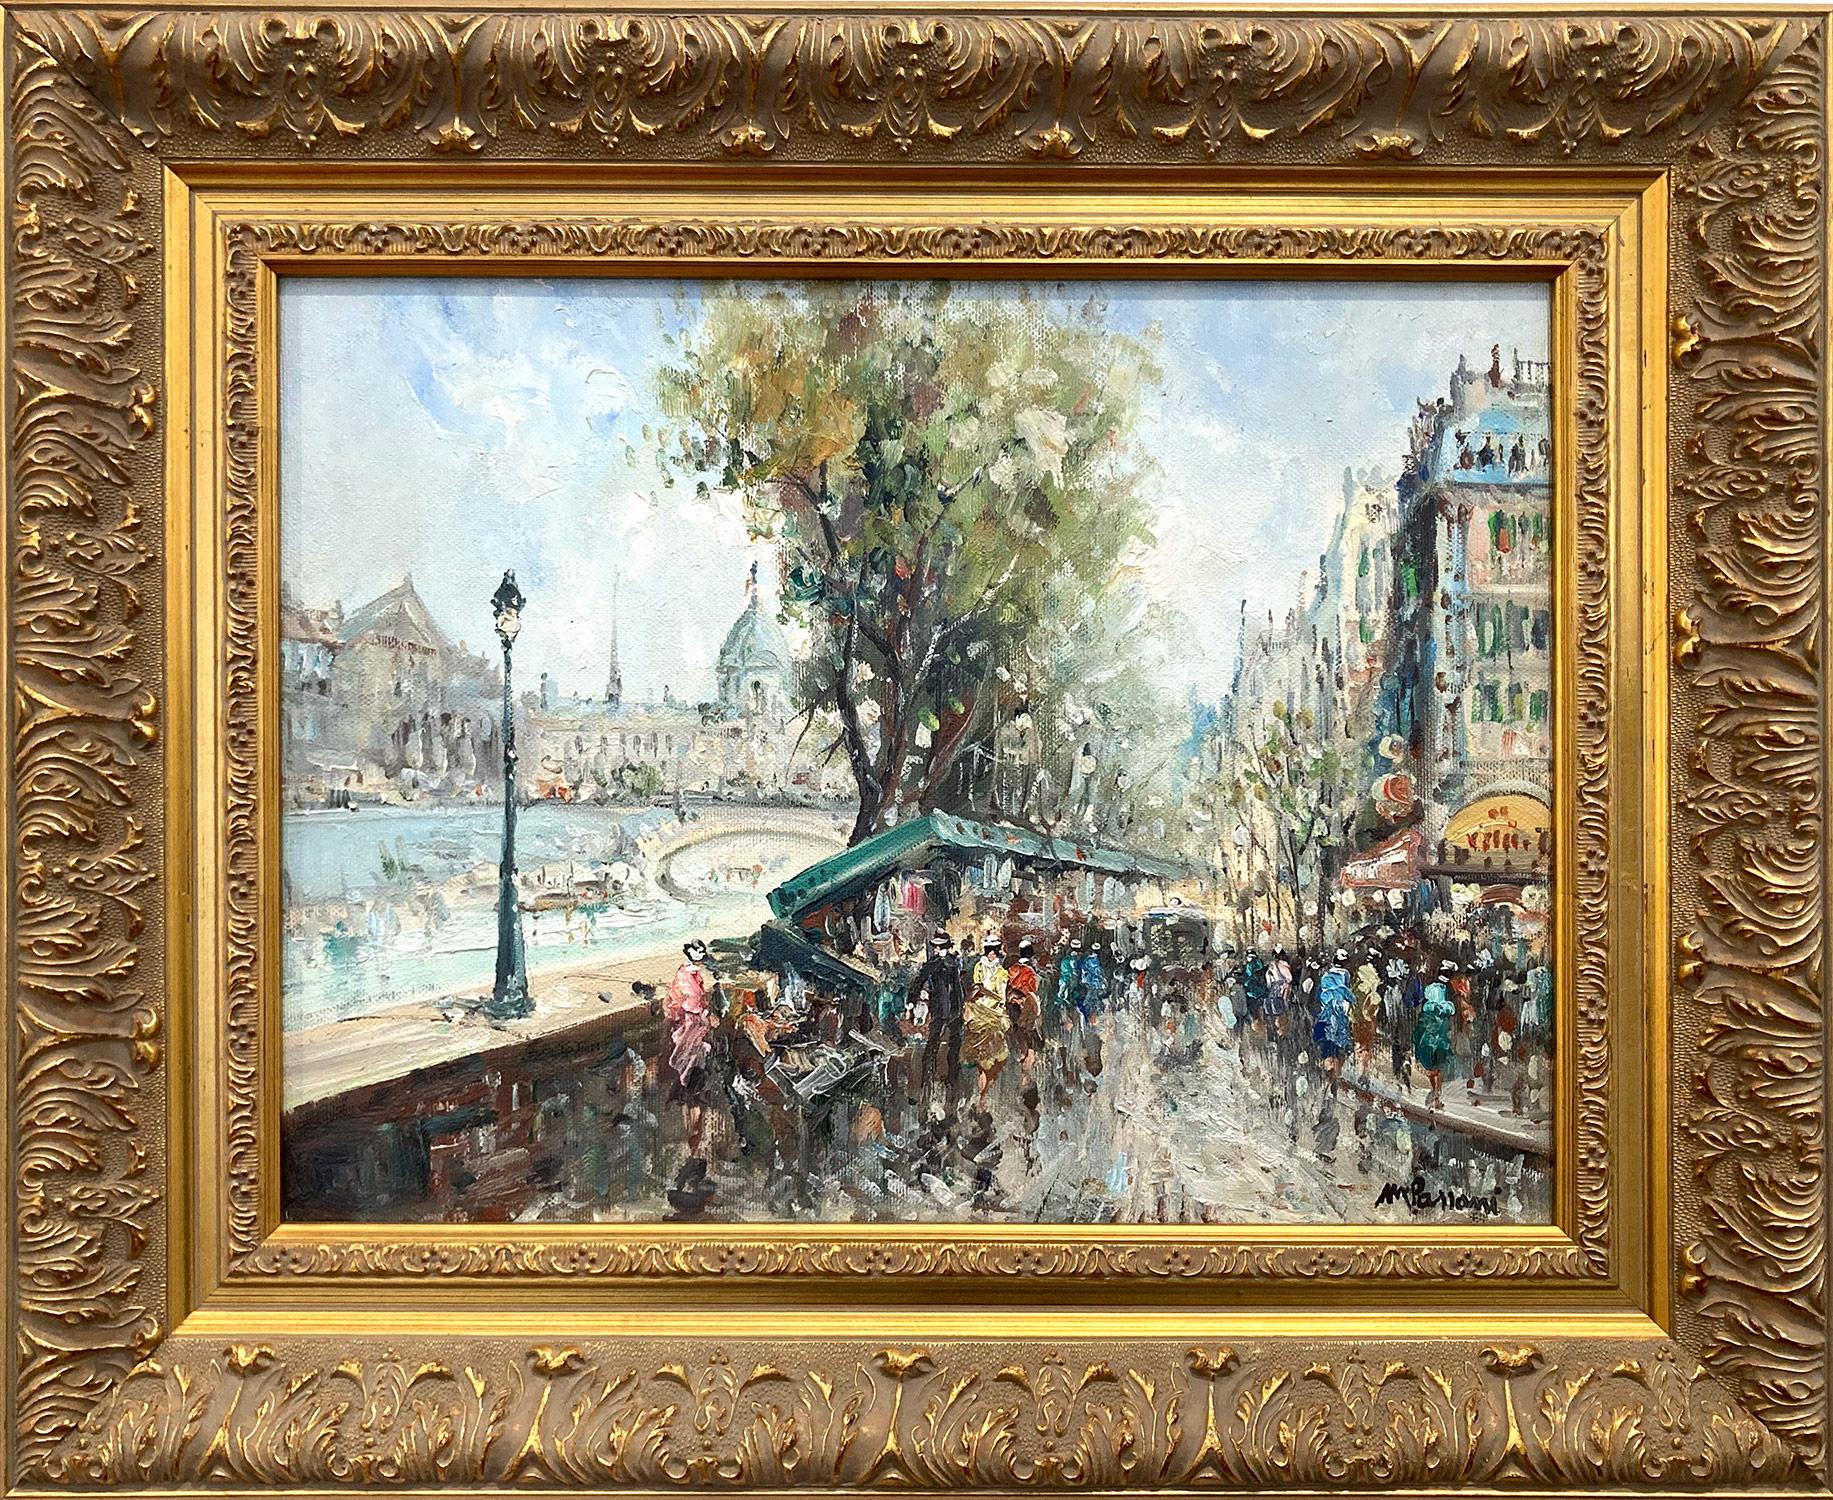 Mario Passoni Figurative Painting - "An Afternoon Along the Seine, Paris" Impressionist Oil Painting on Canvas Scene